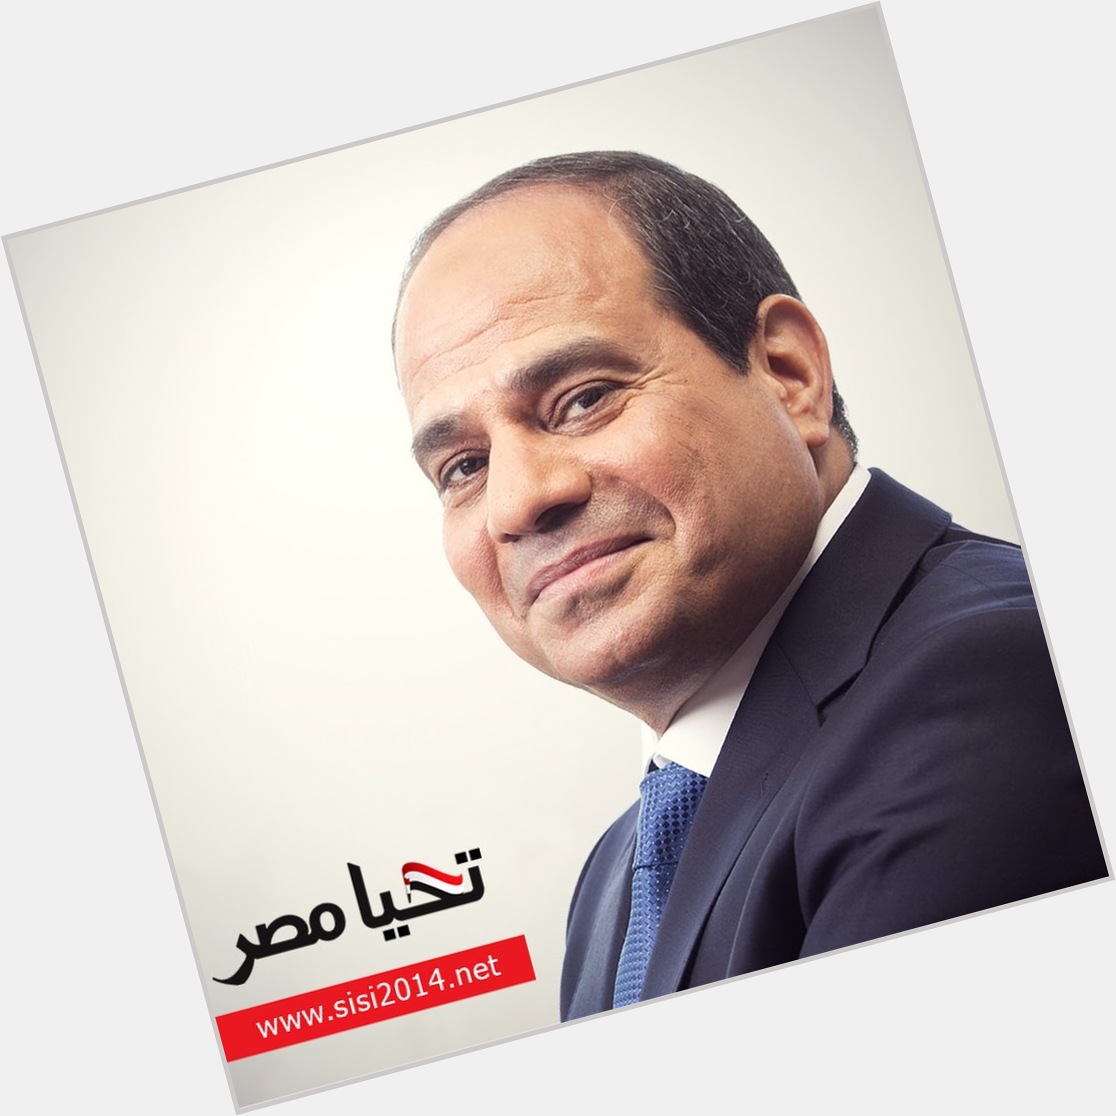 Https://fanpagepress.net/m/Y/Youssef Elsisi New Pic 1